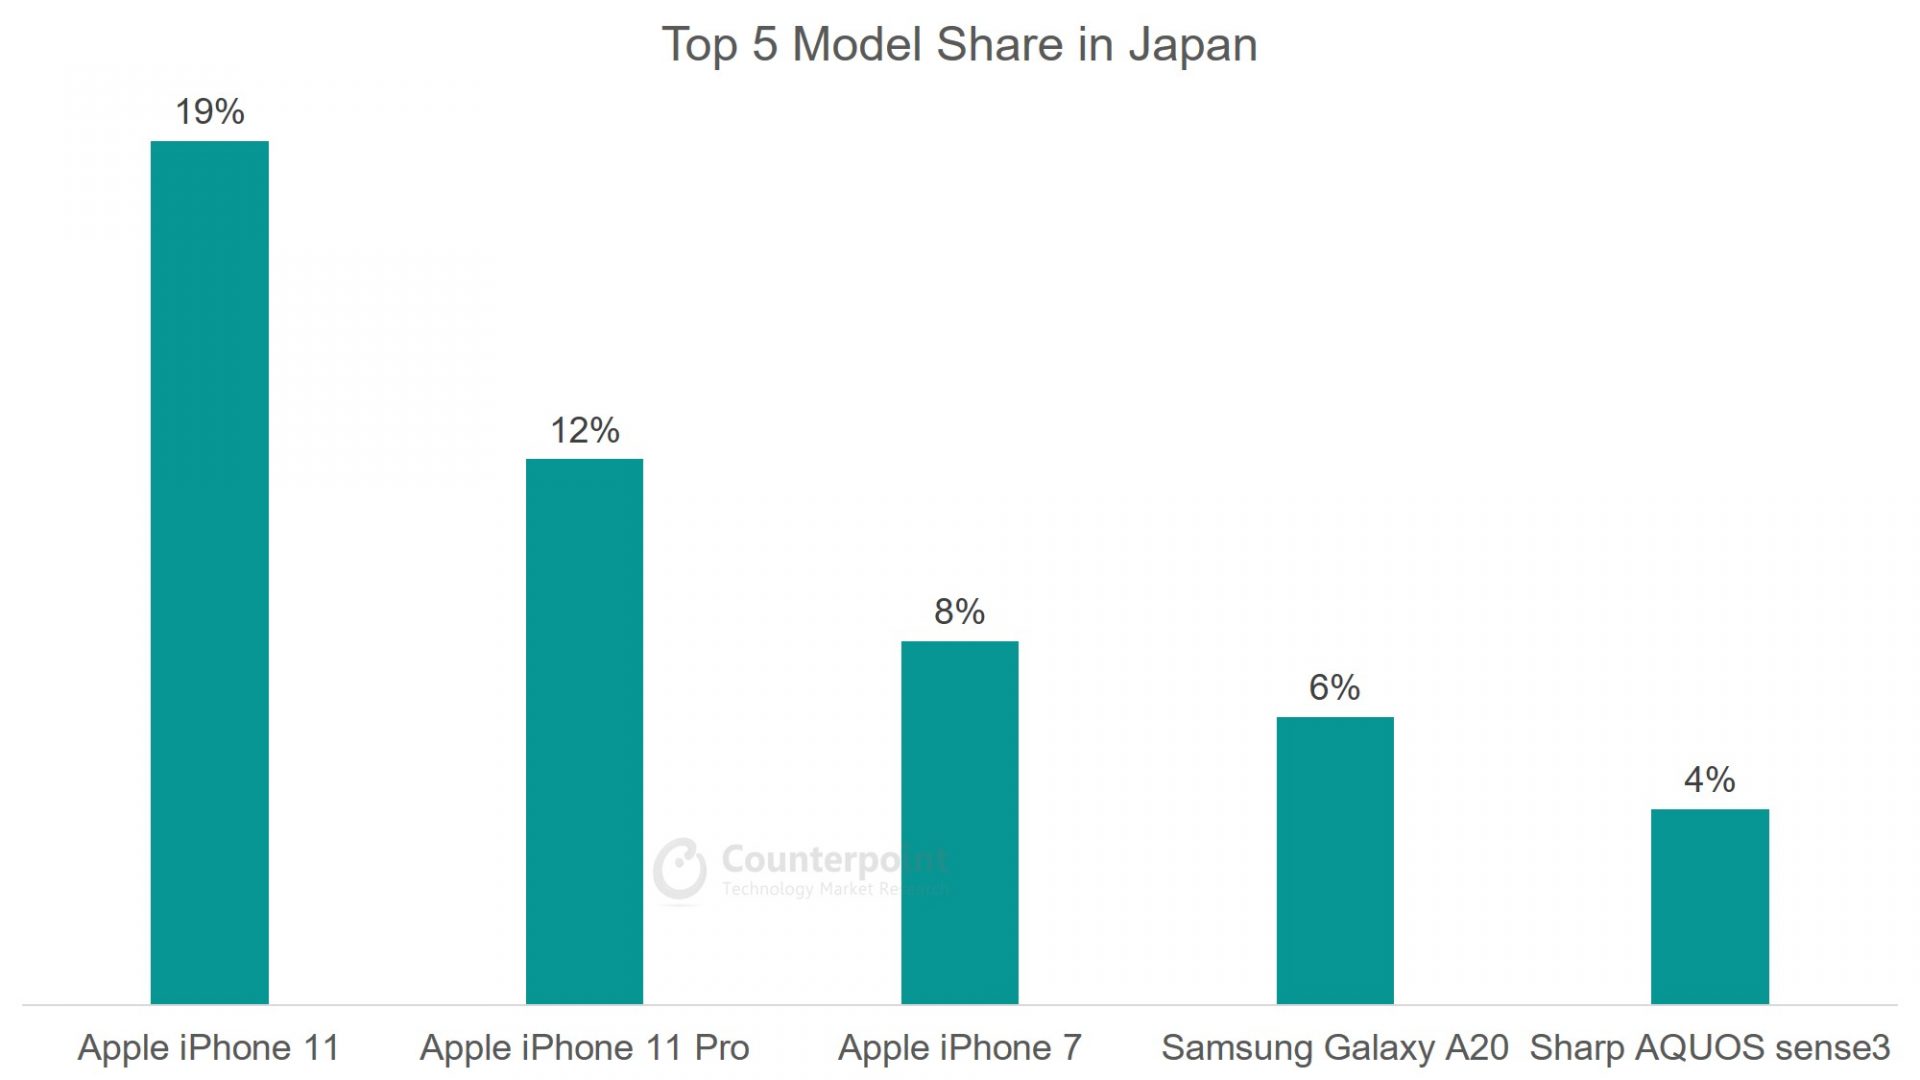 Counterpoint: (Apr 2020) Top 5 Smartphone Model Share in Japan